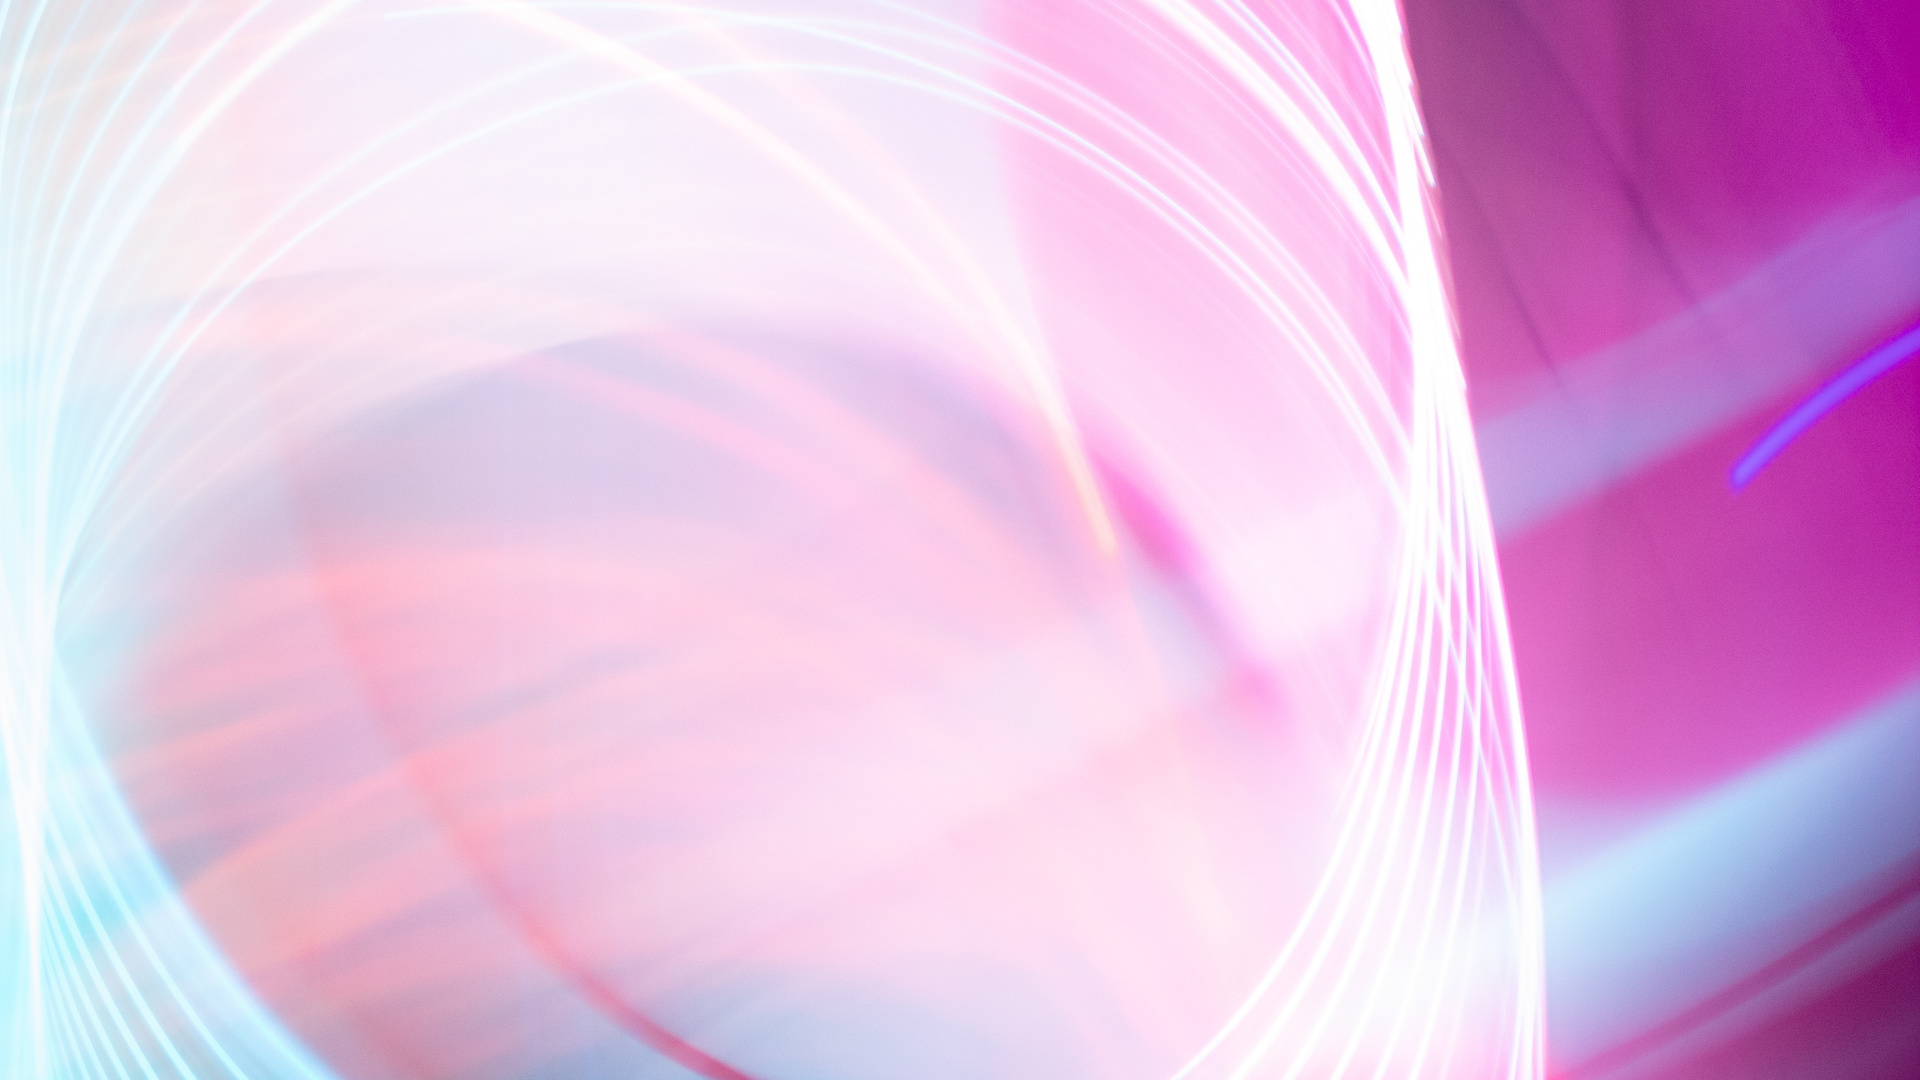 Pink and White Light Digital Wallpaper. Wallpaper in 1920x1080 Resolution